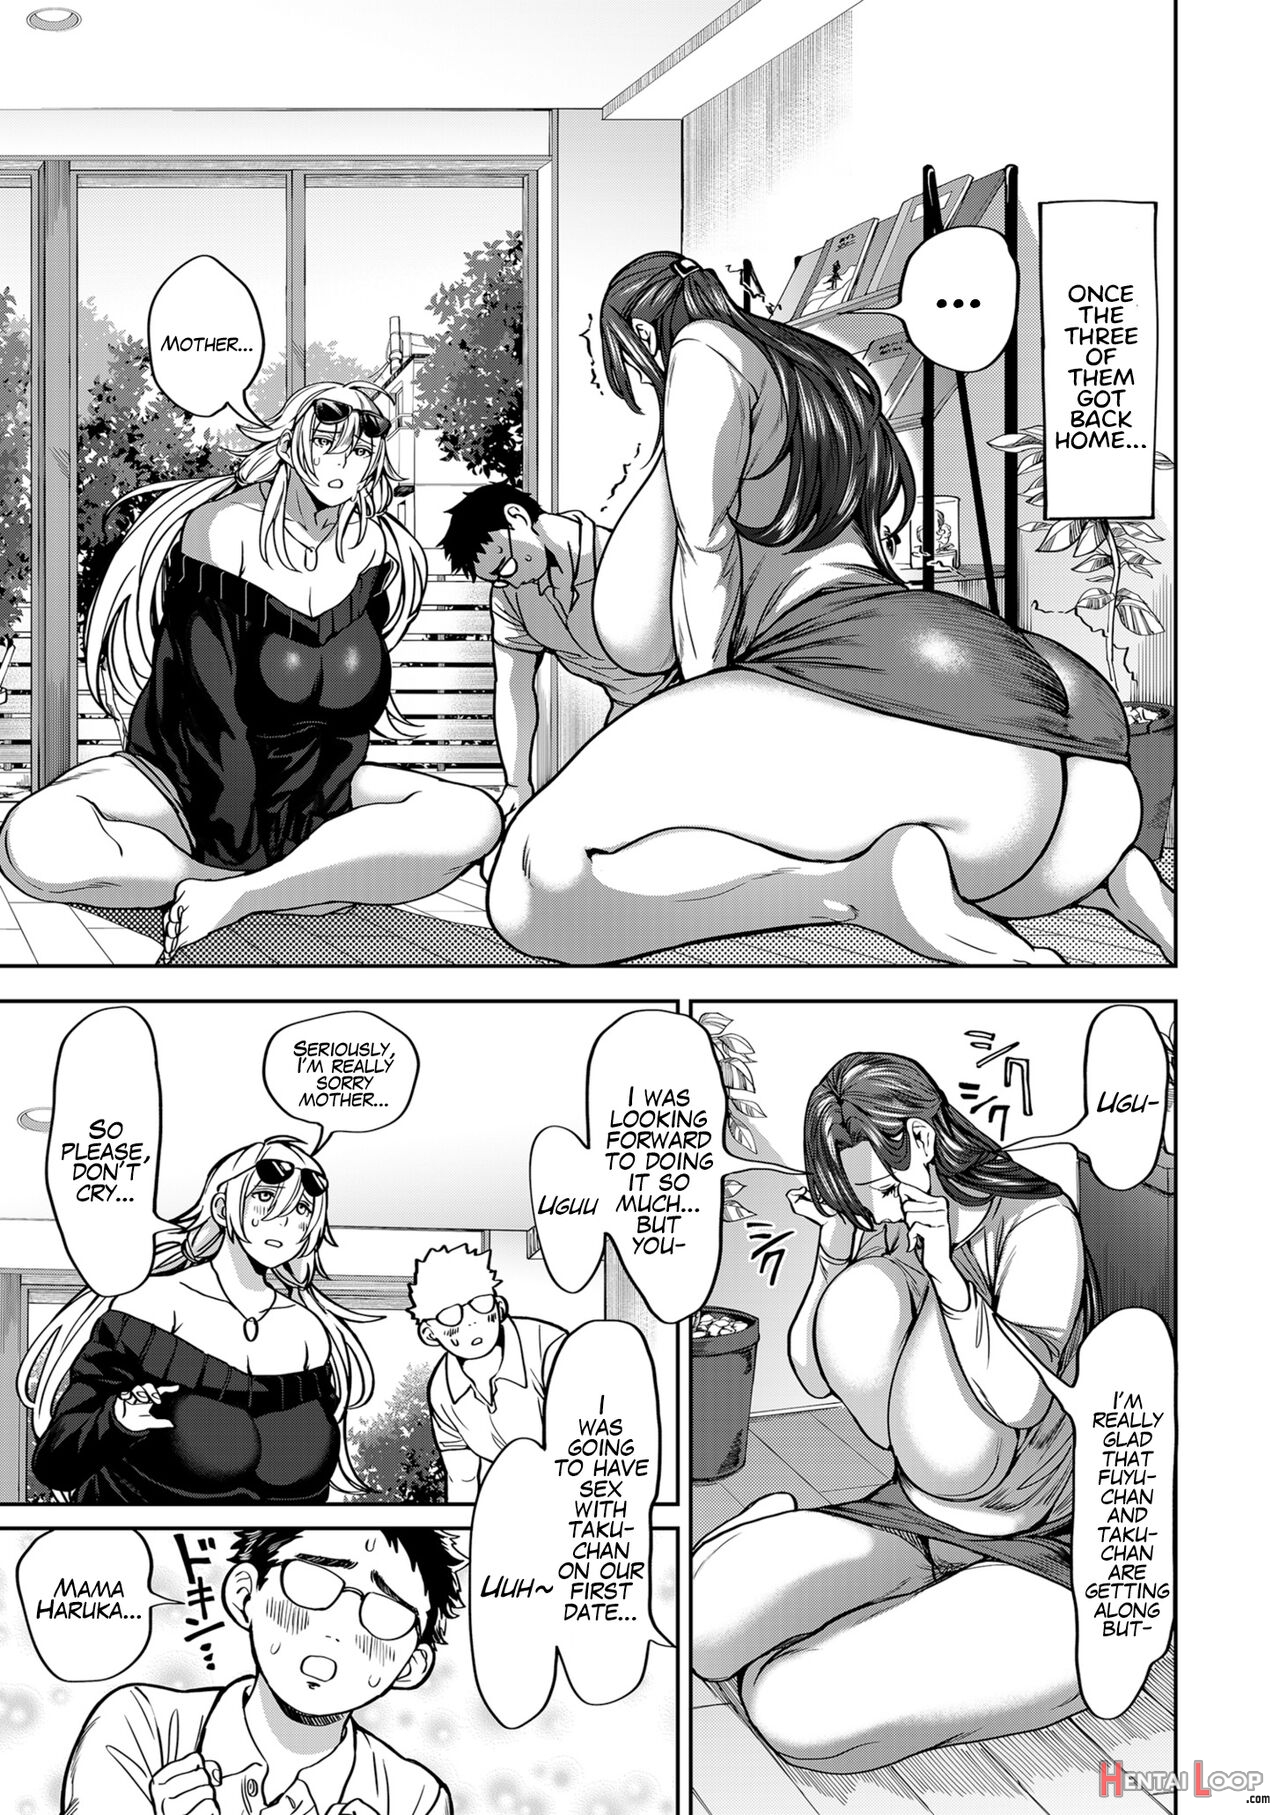 A Harem Paradise For All Seasons! Part 5: Mother Vs Daughter page 1